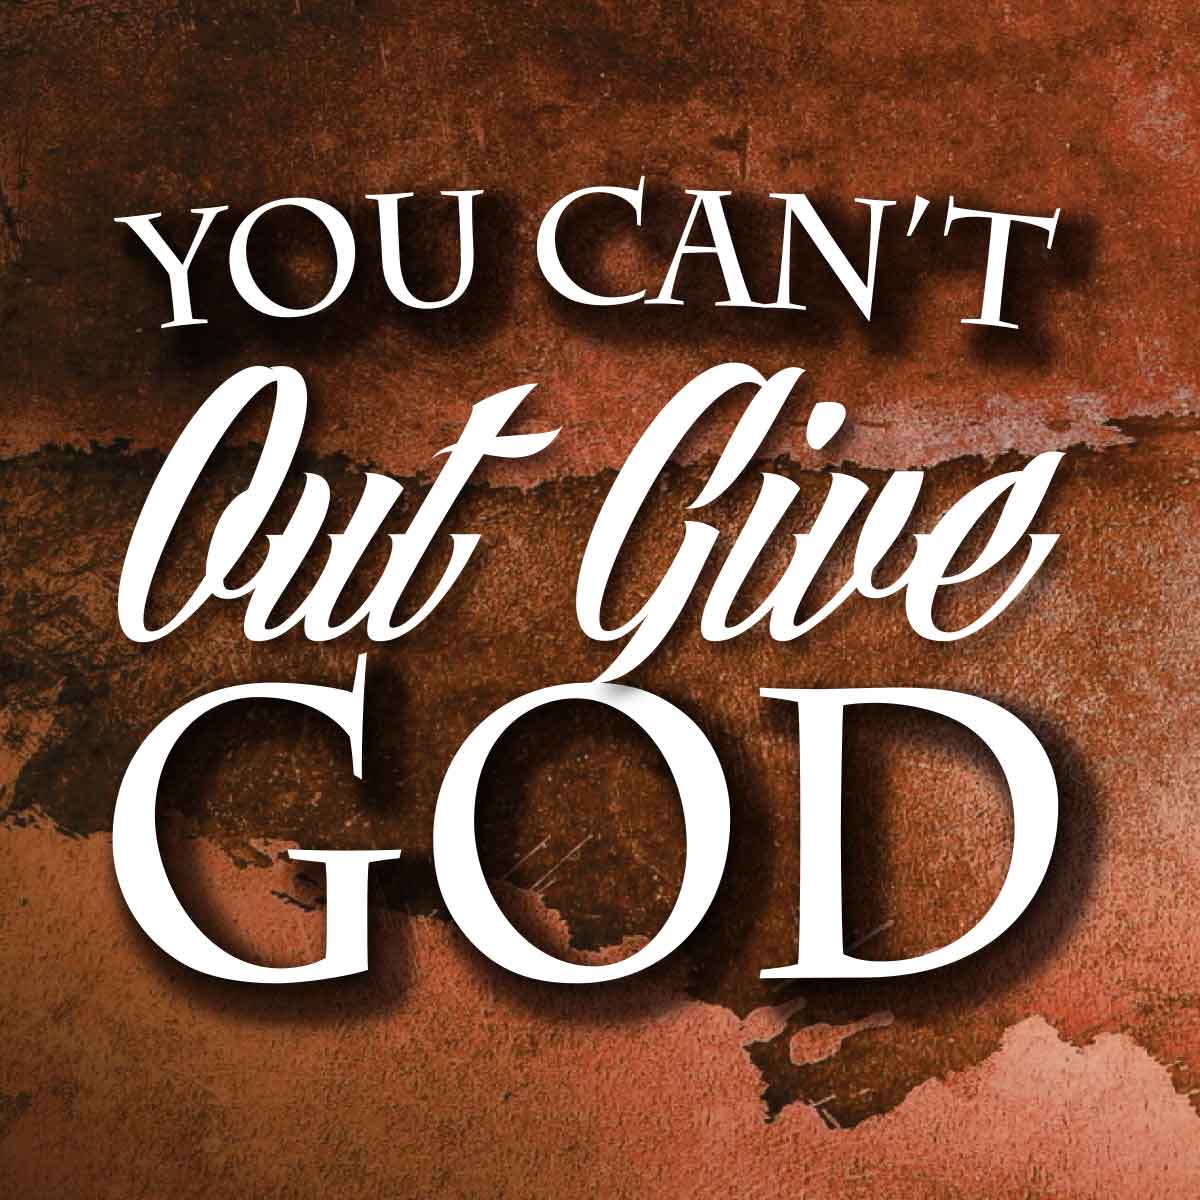 You Can't Out Give God - Journey Church in Pineville Core Value